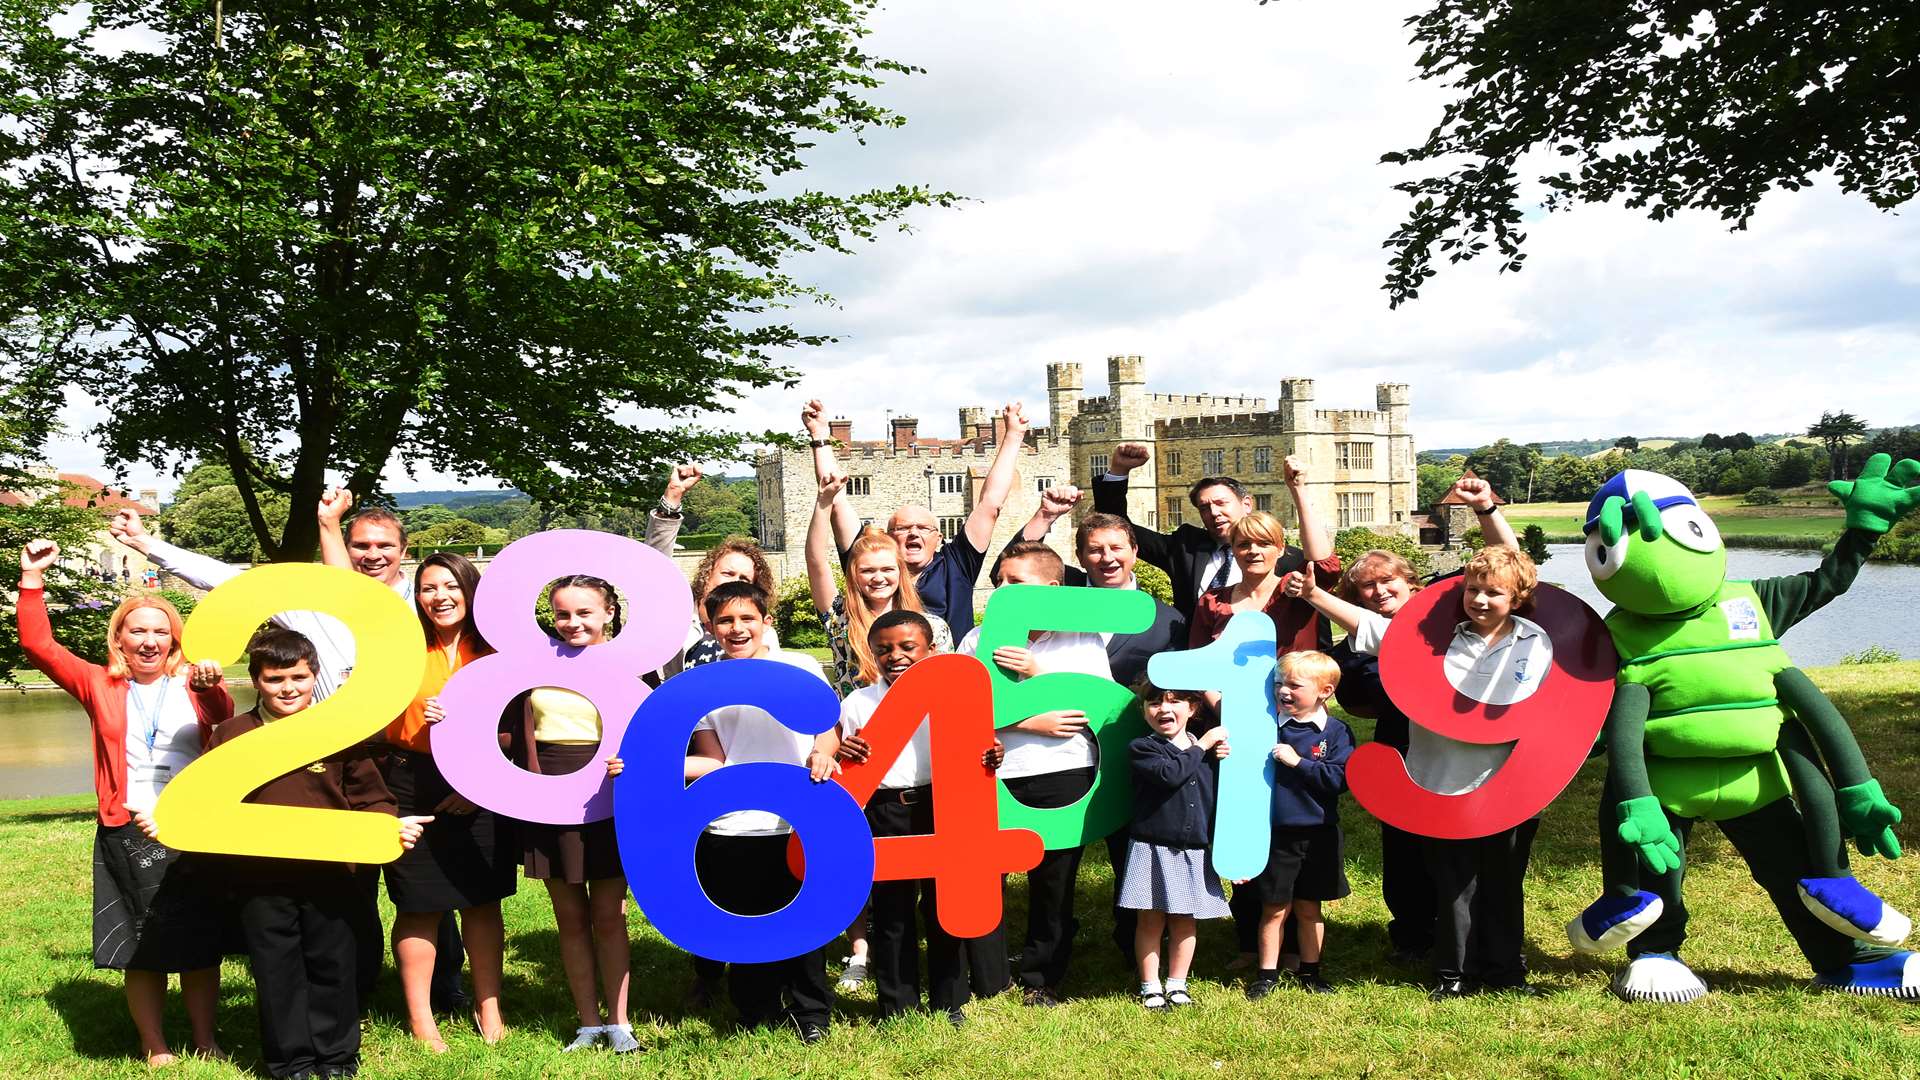 Buster's Book Club pupils and key partners celebrate a huge 2,864,519 minutes of home reading for the 2015-2016 academic year at the Summer Challenge Day event staged at Leeds Castle